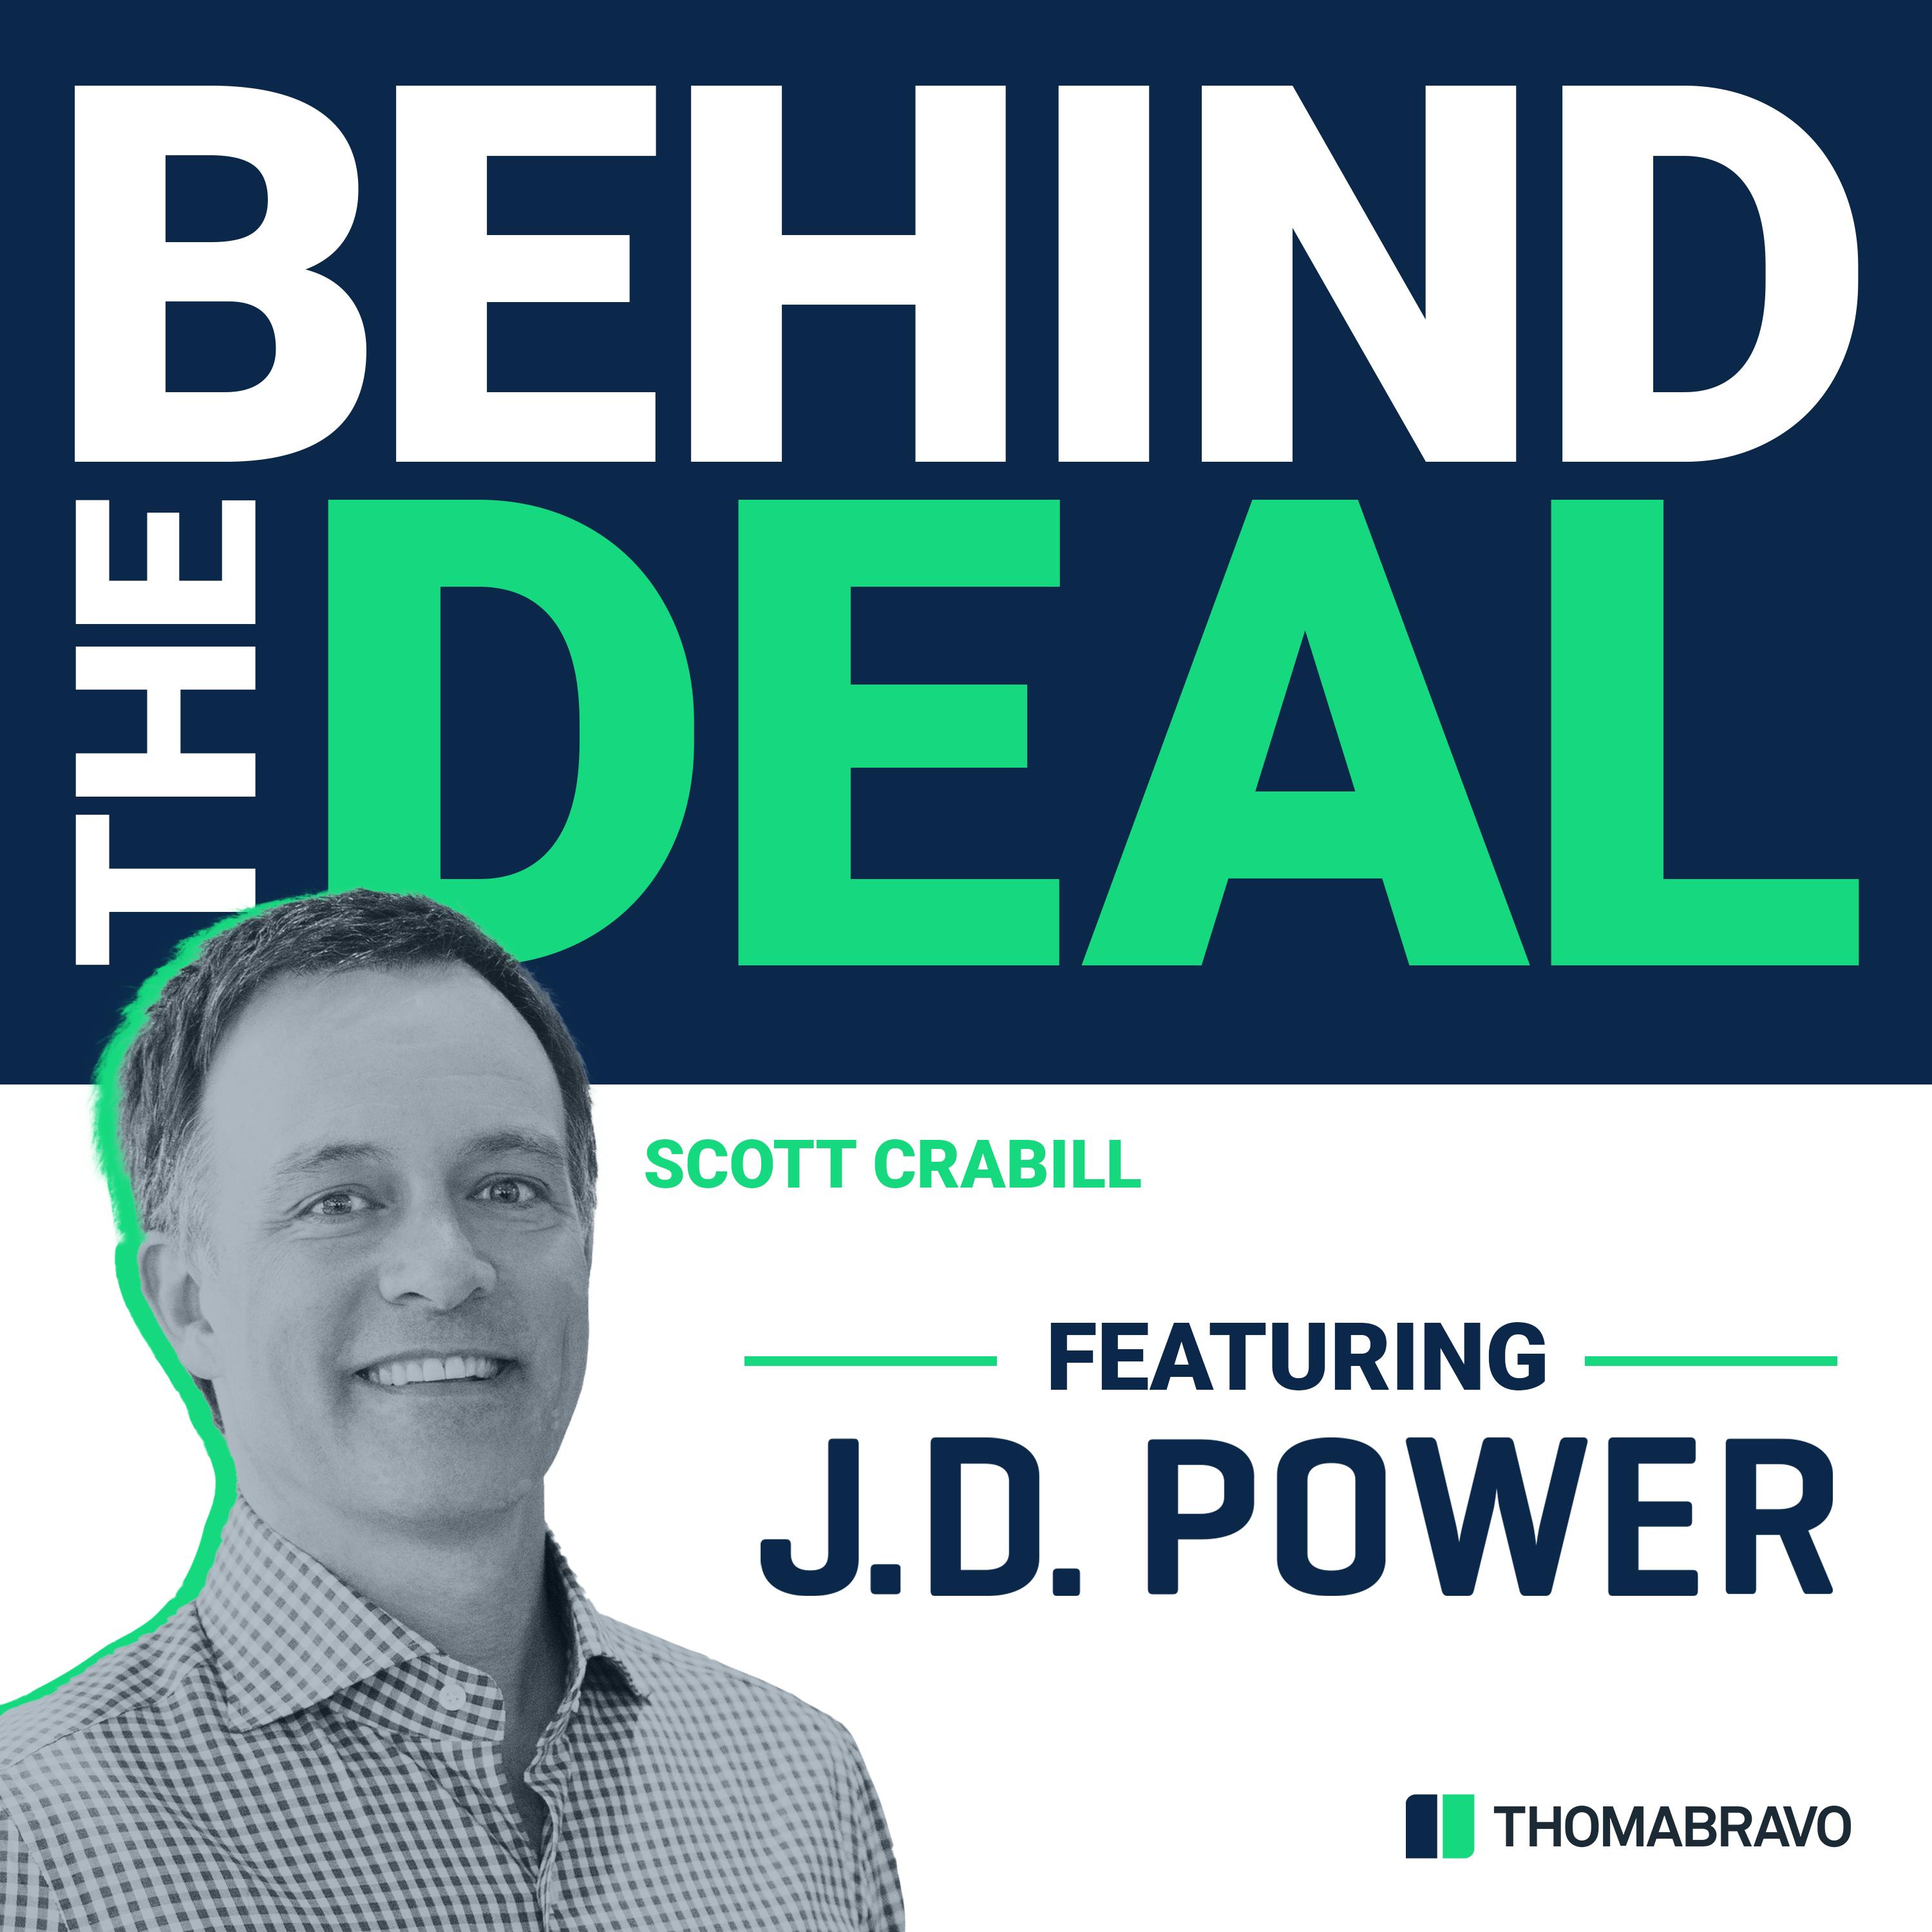 How J.D. Power Uses Data to Drive the Auto Industry Forward